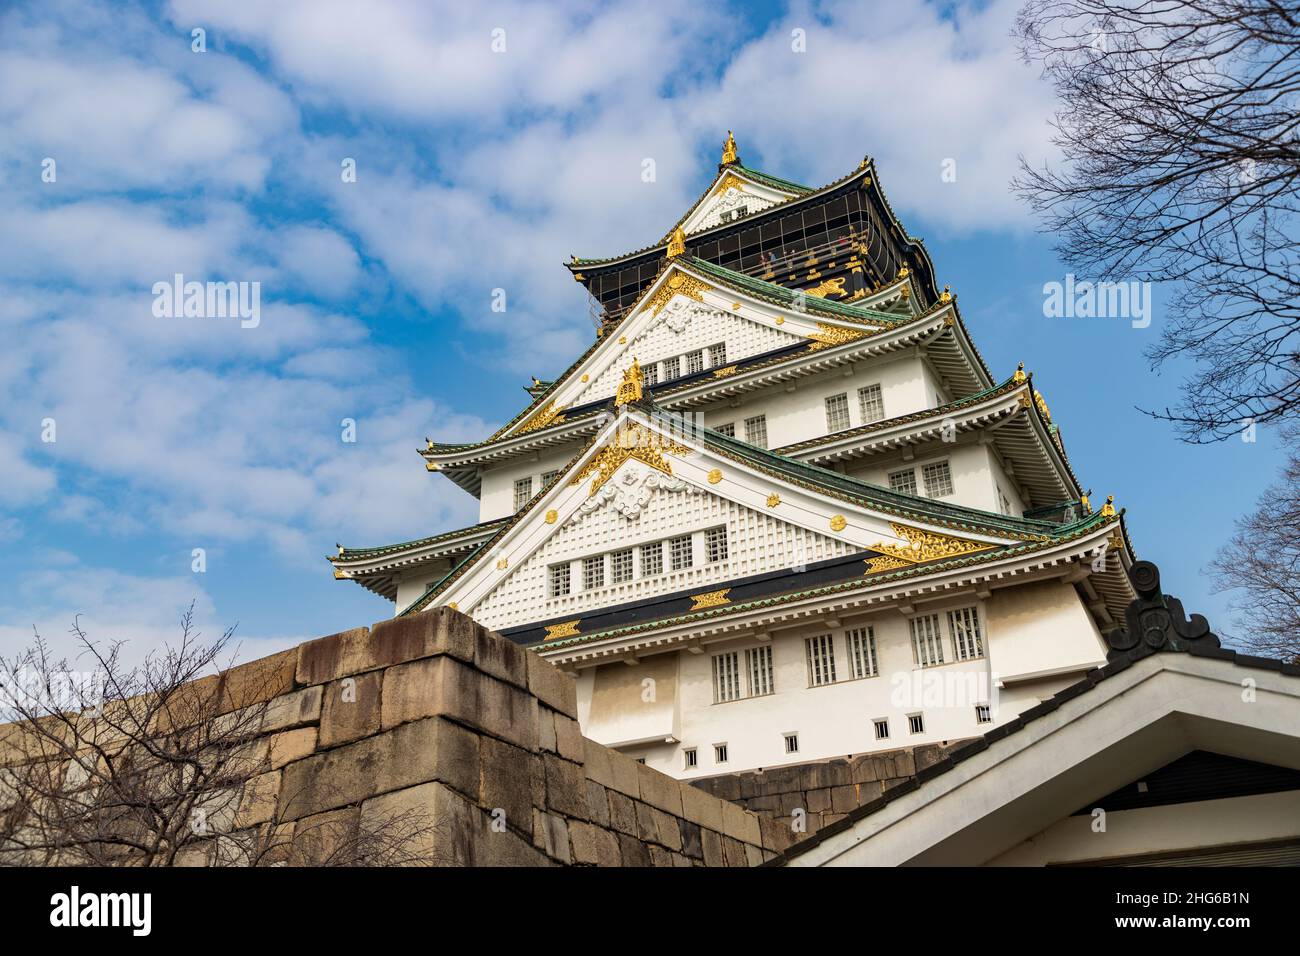 A picture of the Osaka Castle and taken from the square below. Stock Photo